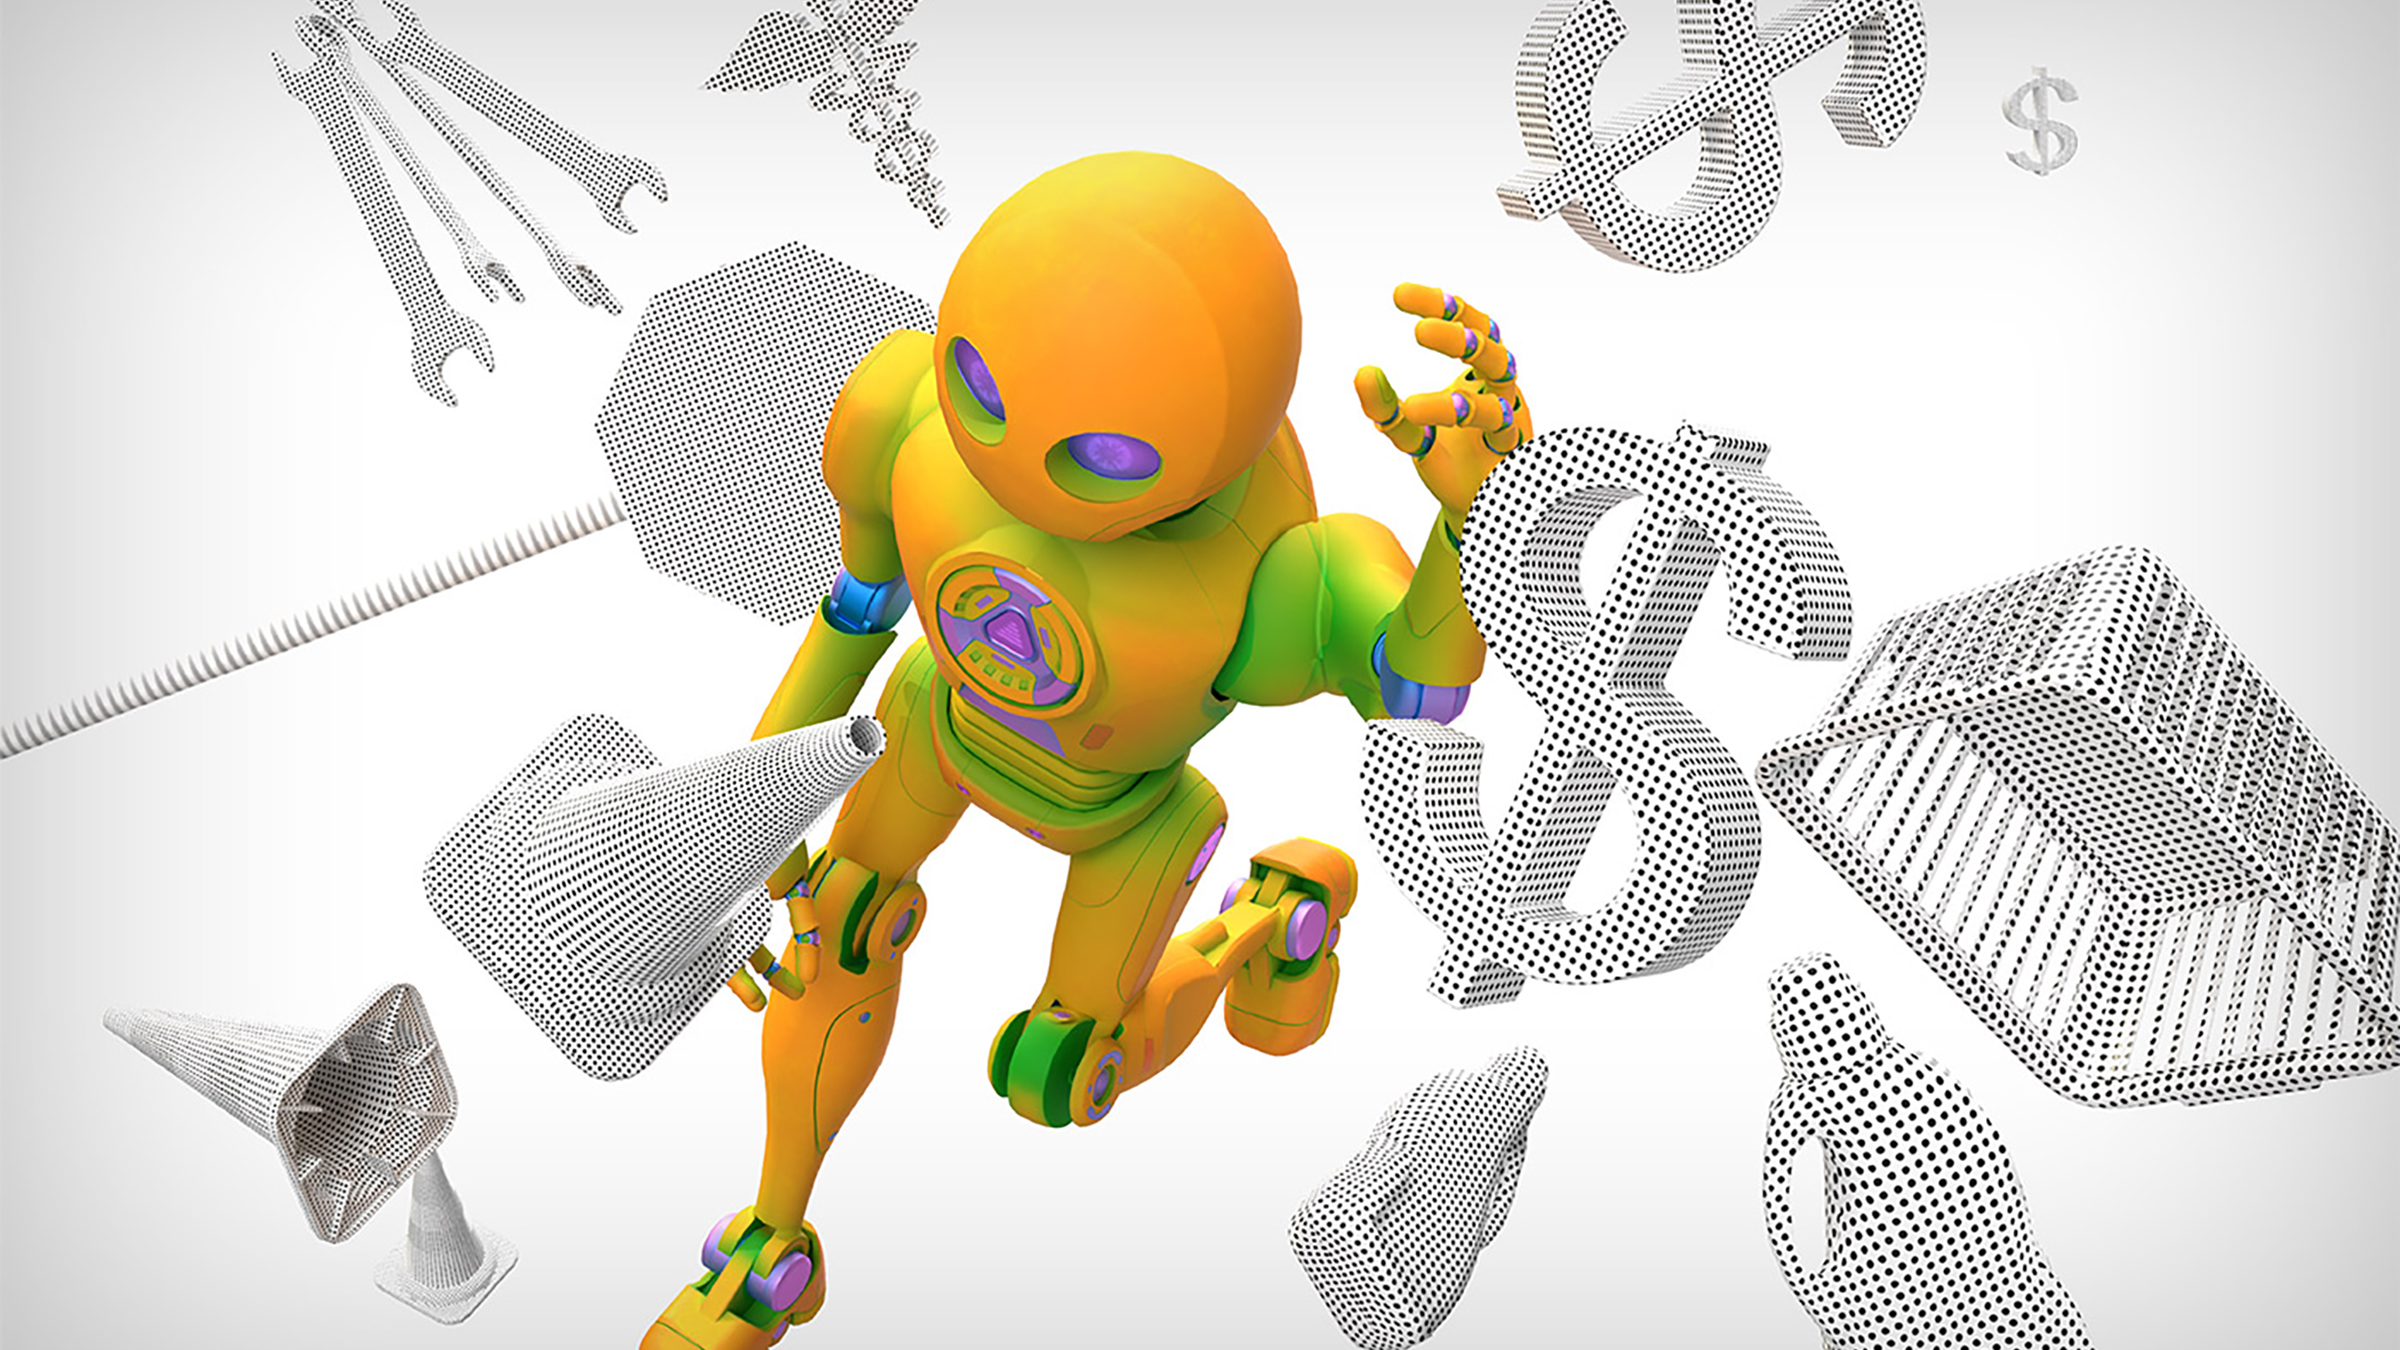 Illustration of a robot walking through a cloud of symbols for money, driving, housekeeping and health care float by